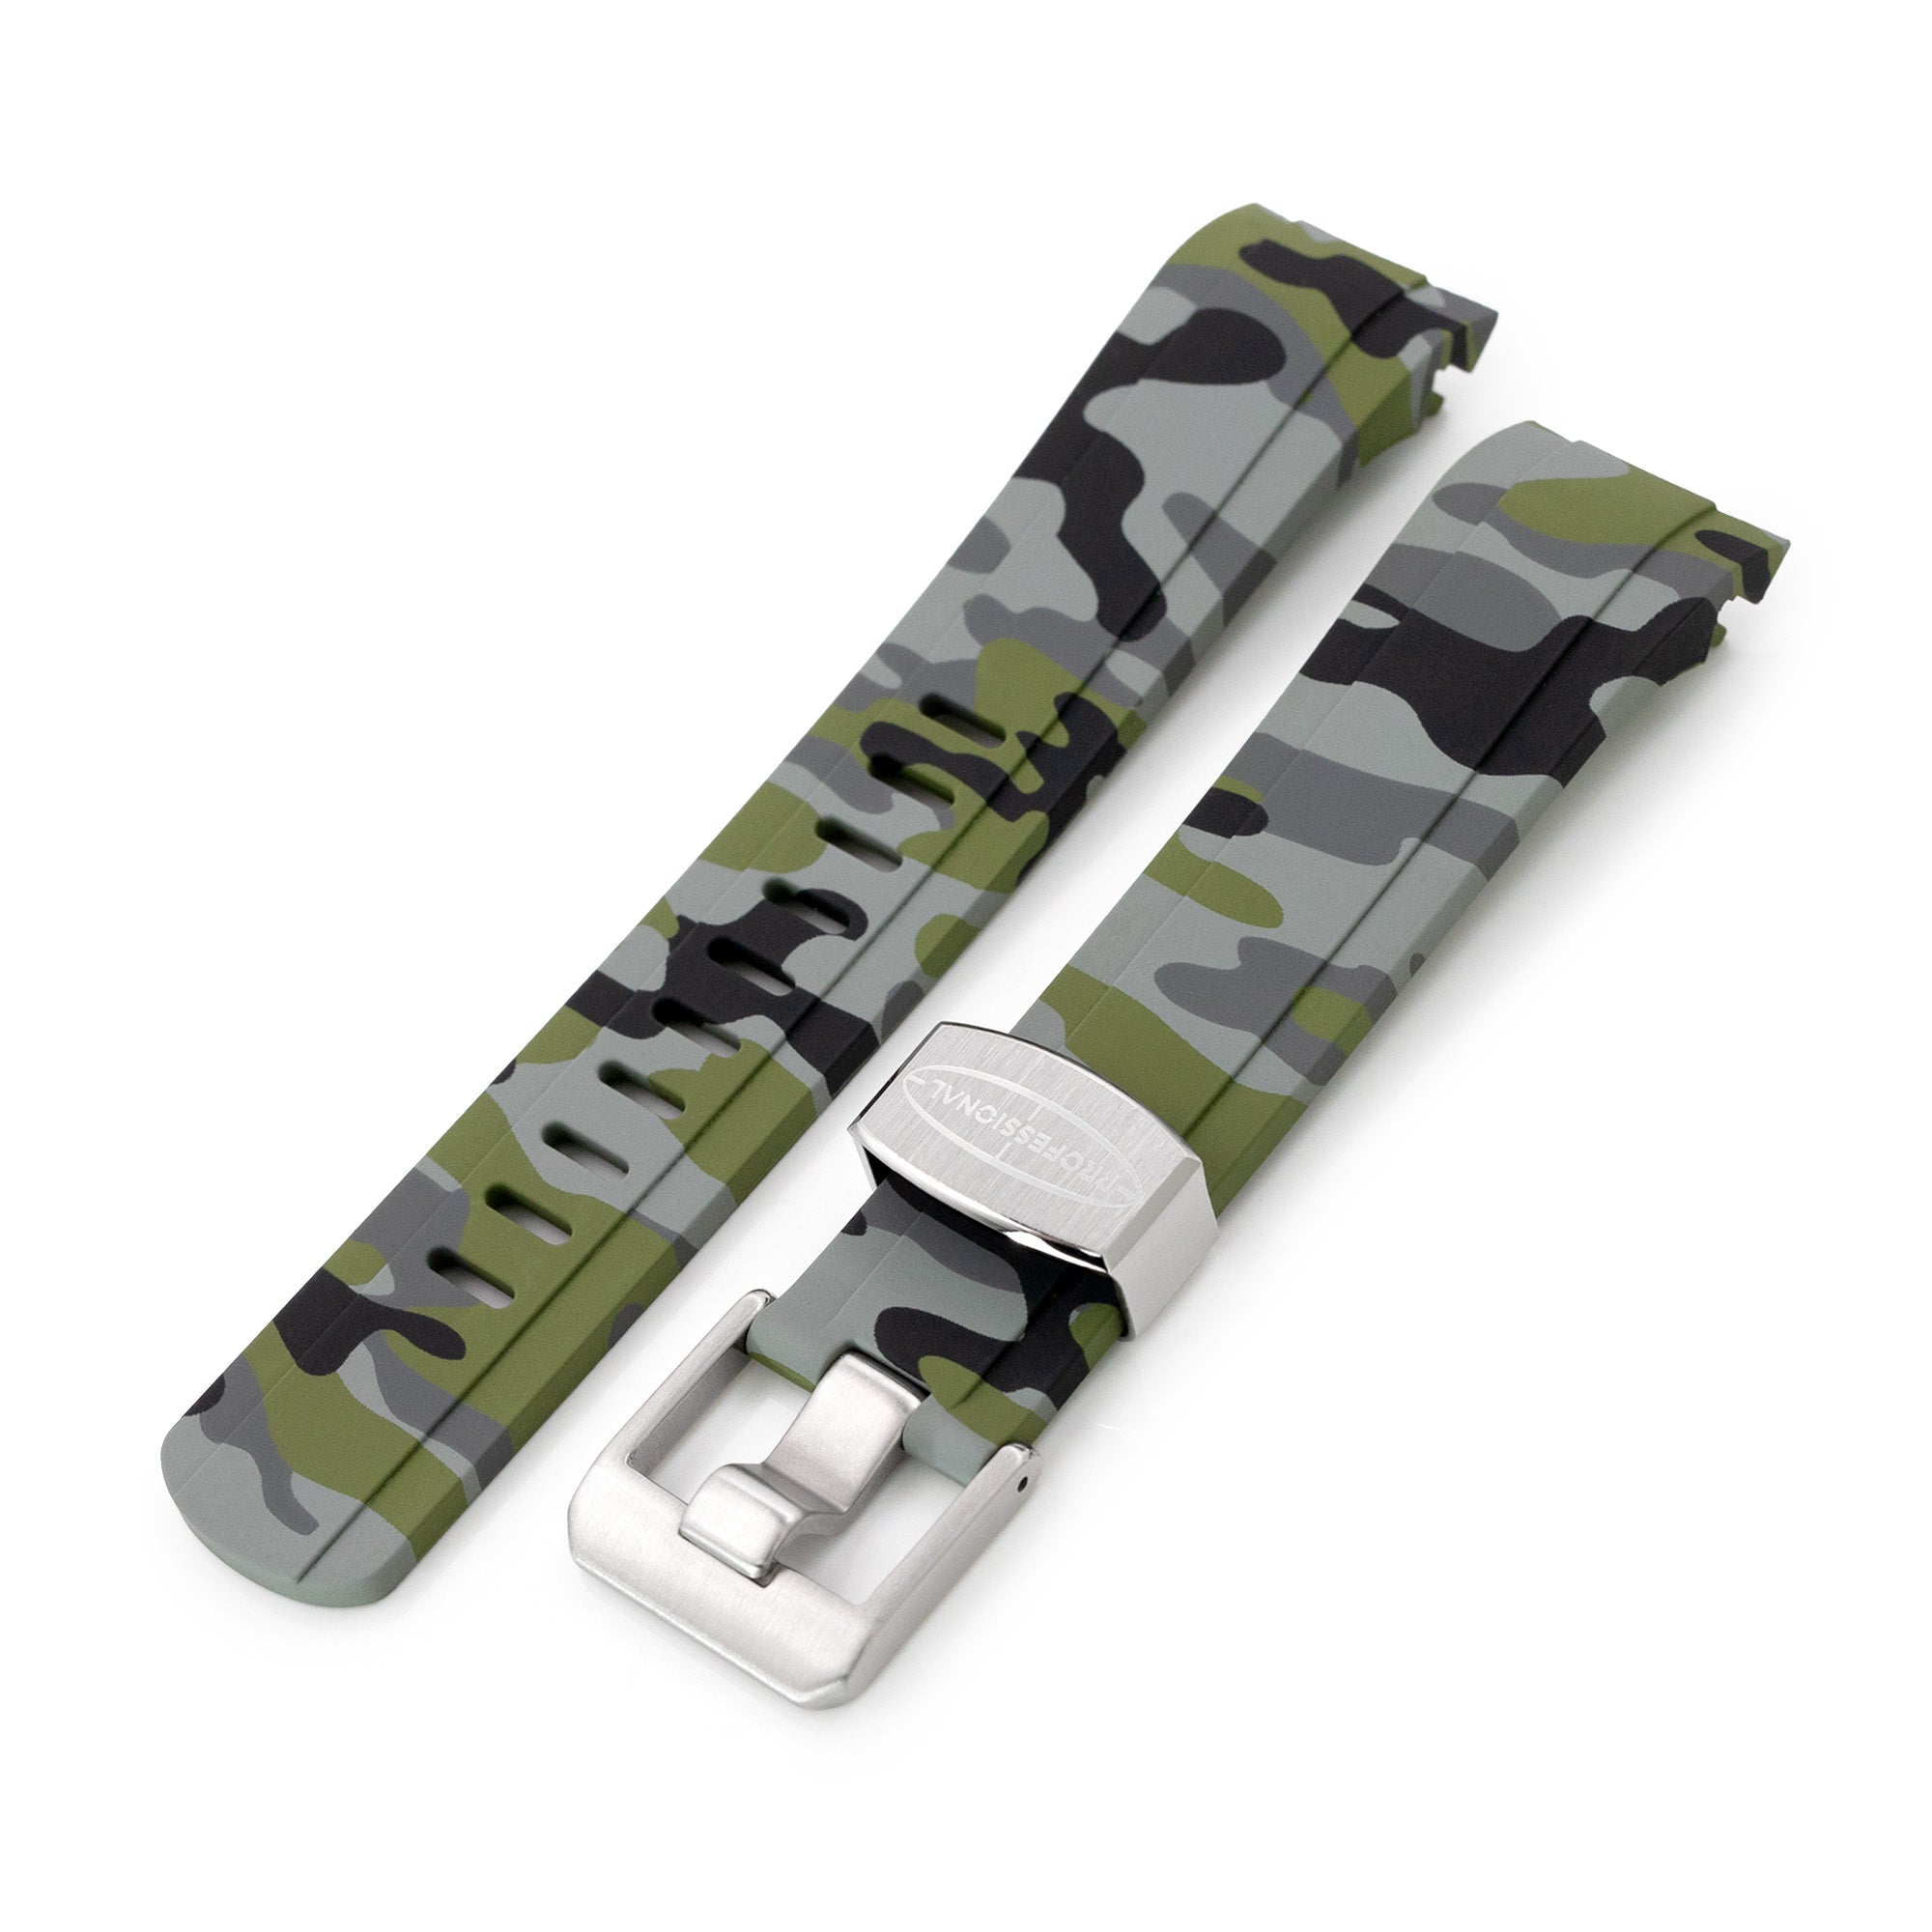 22mm Crafter Blue - CB10 Green Camouflage Rubber Curved Lug Watch Band for Seiko SKX007 Strapcode Watch Bands